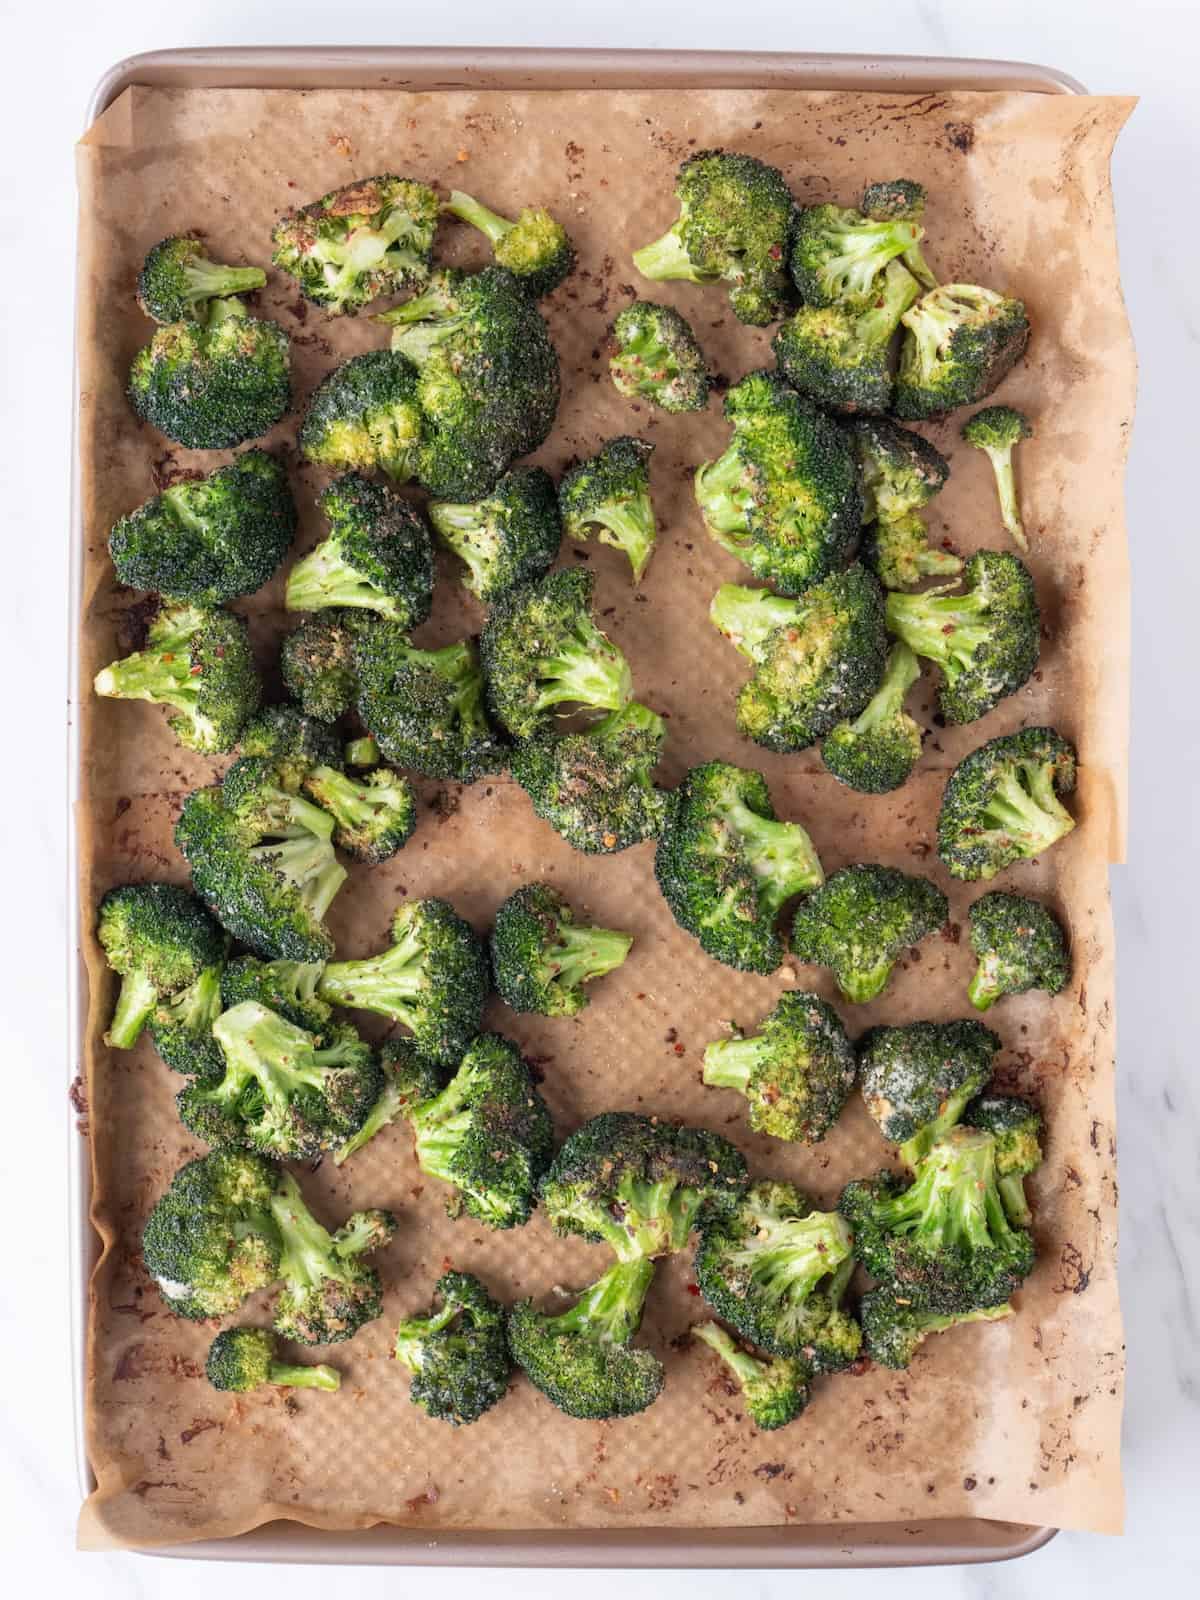 A parchment-lined baking sheet with broccoli florets baked, crispy and just out of the oven.